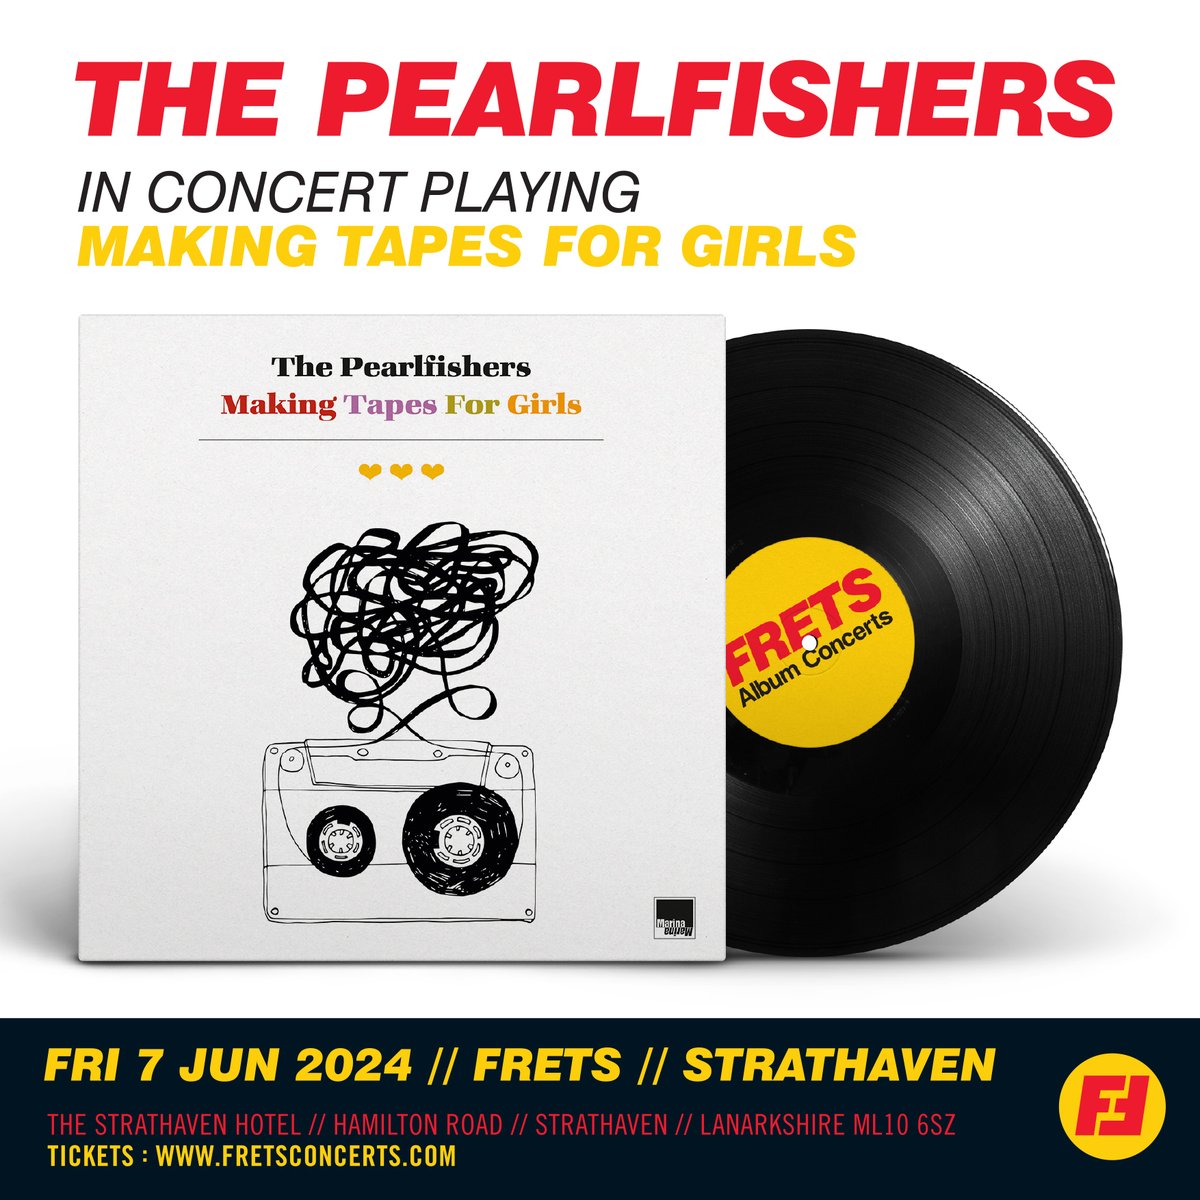 2/2: The Pearlifishers will perform Making Tapes For Girls followed by some of their best known songs. It'll be a special night, head Pearlfisher David Scott has Wilson/Rundgren/Webb pop melody in his veins. Tickets: wegottickets.com/event/614909